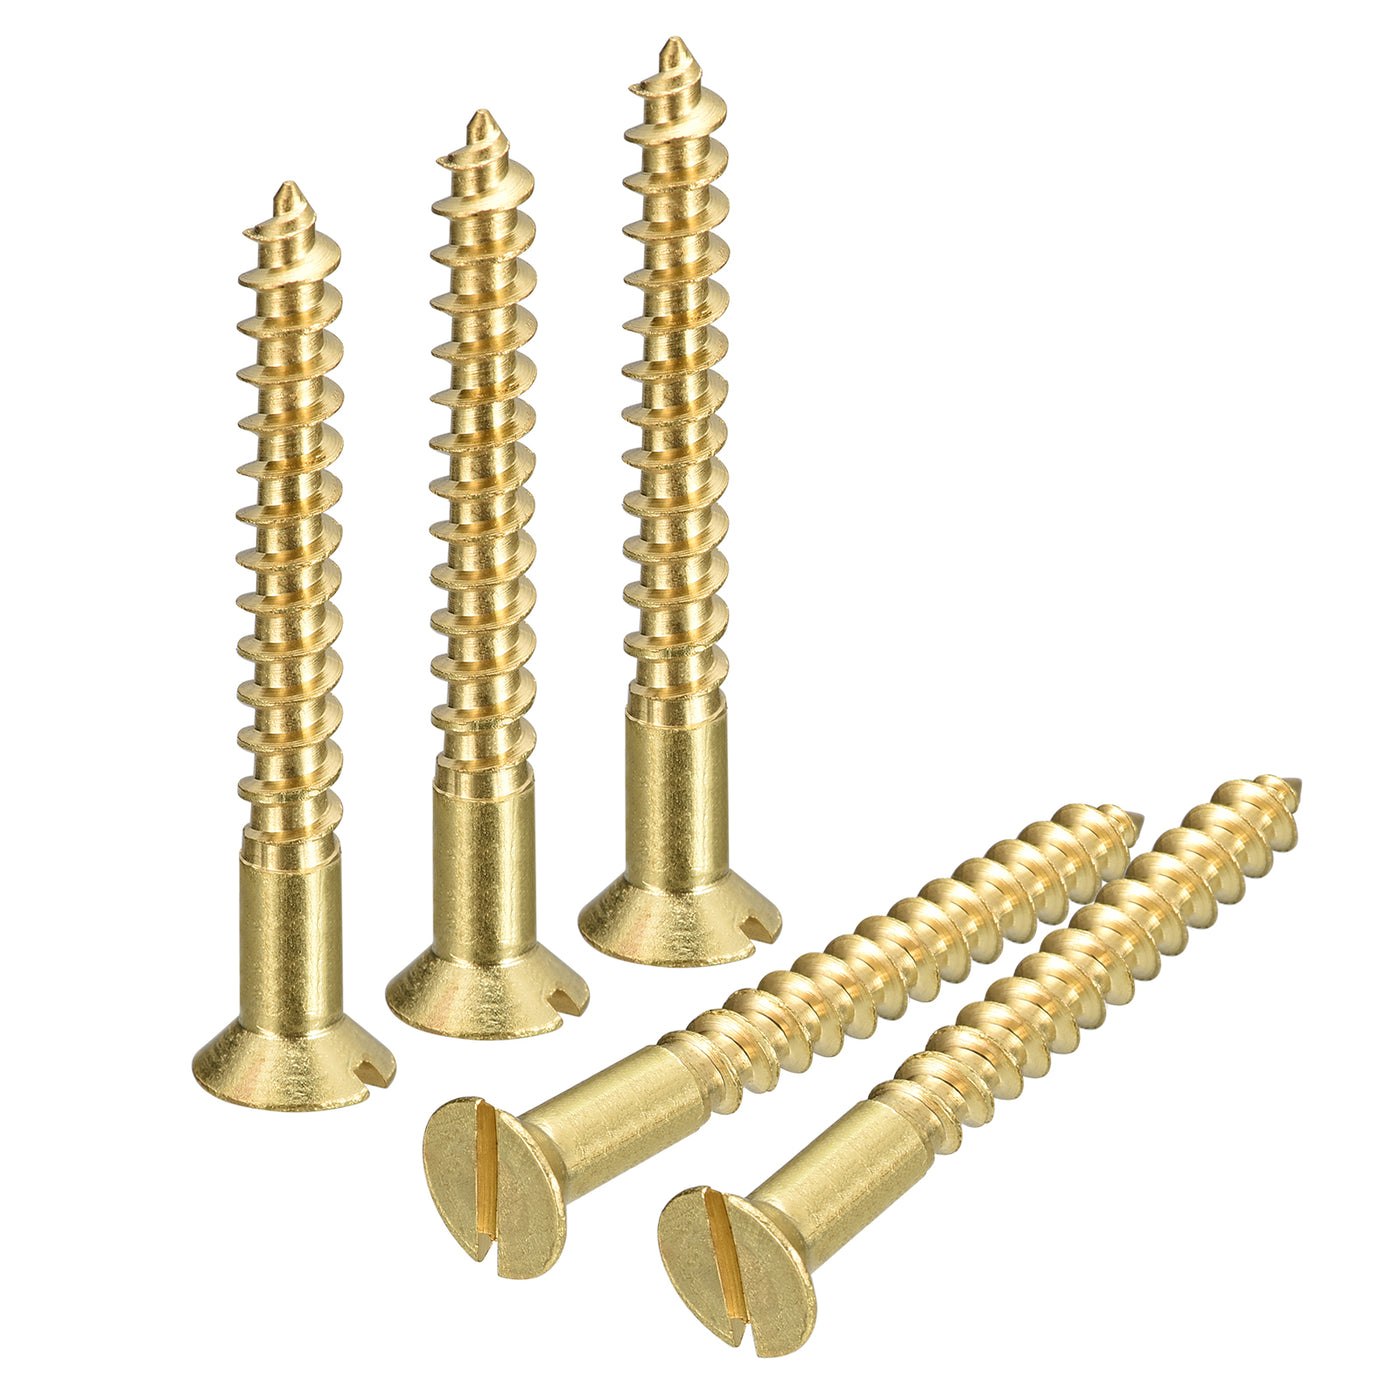 uxcell Uxcell 25Pcs M4.5 x 40mm Brass Slotted Drive Flat Head Wood Screws Self Tapping Screw